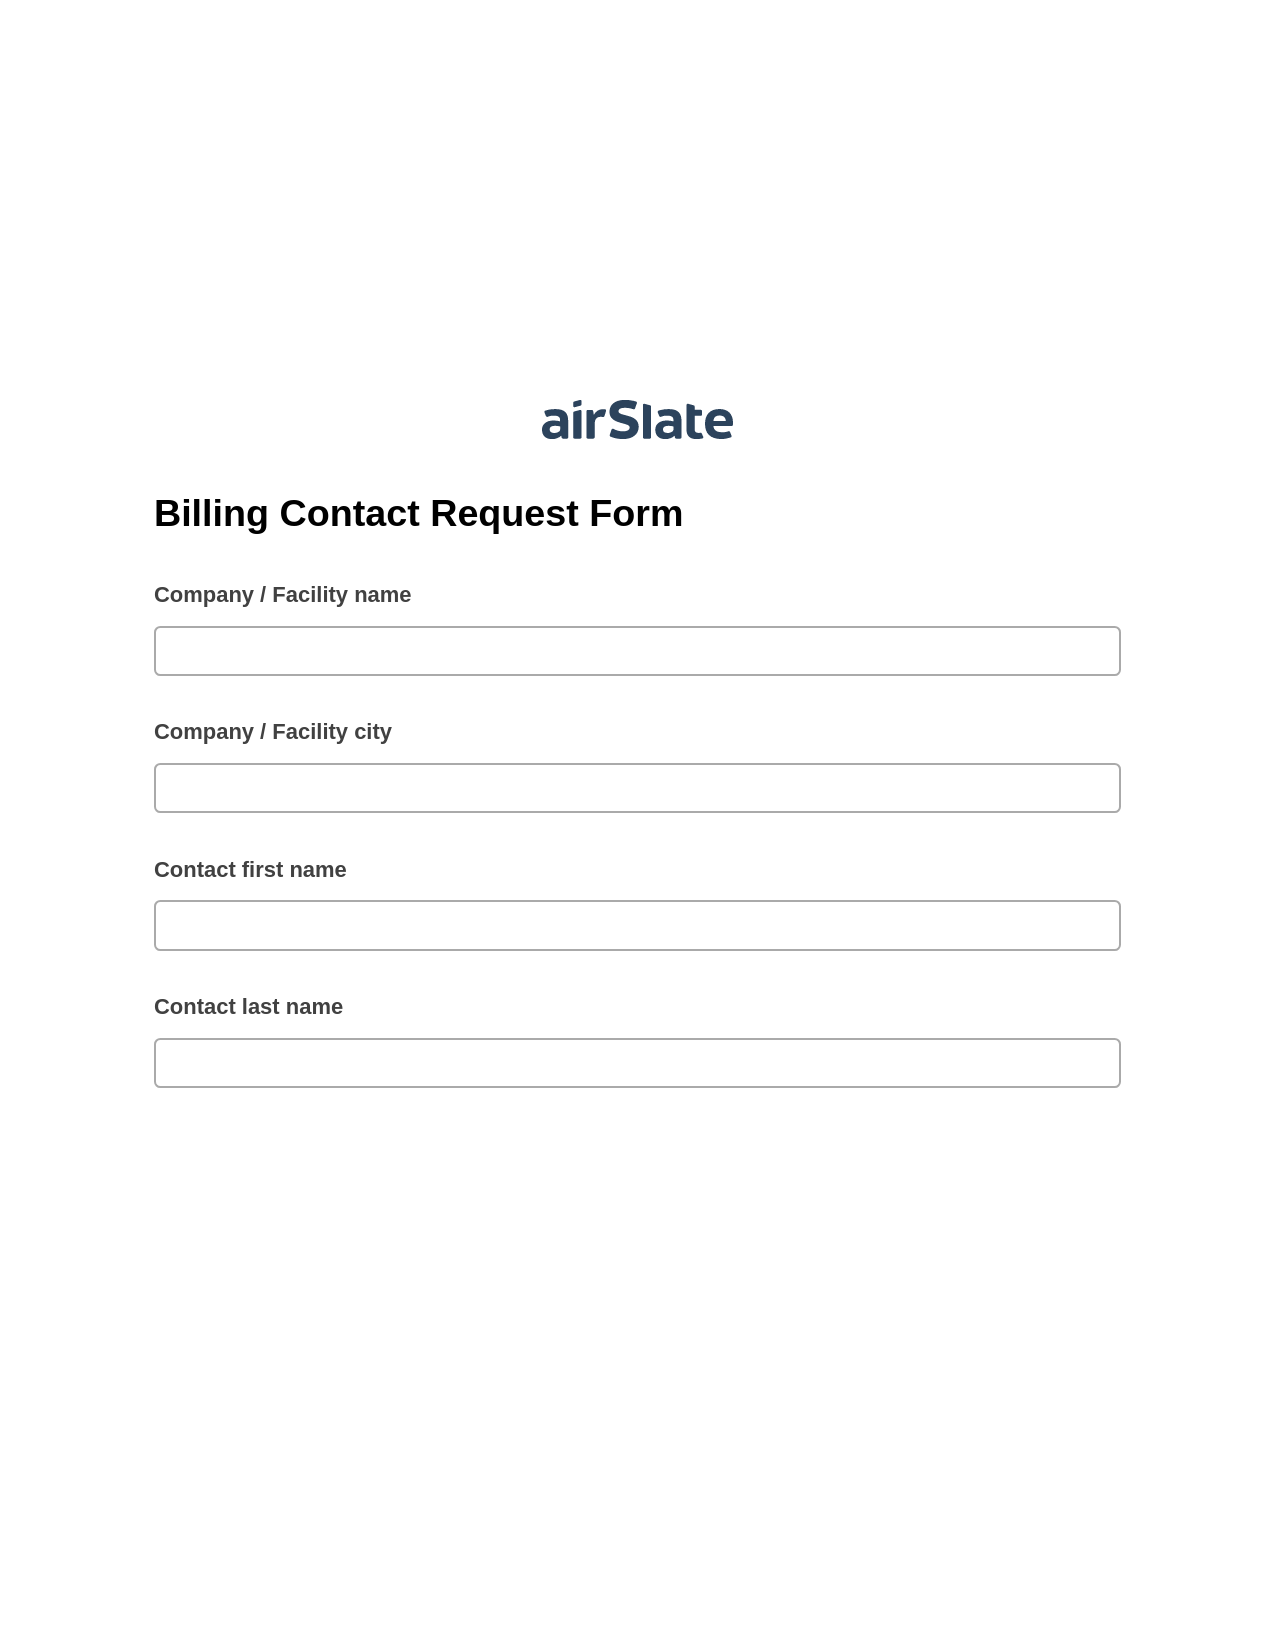 Multirole Billing Contact Request Form Pre-fill Slate from MS Dynamics 365 Records Bot, Export to MS Dynamics 365 Bot, Export to MySQL Bot